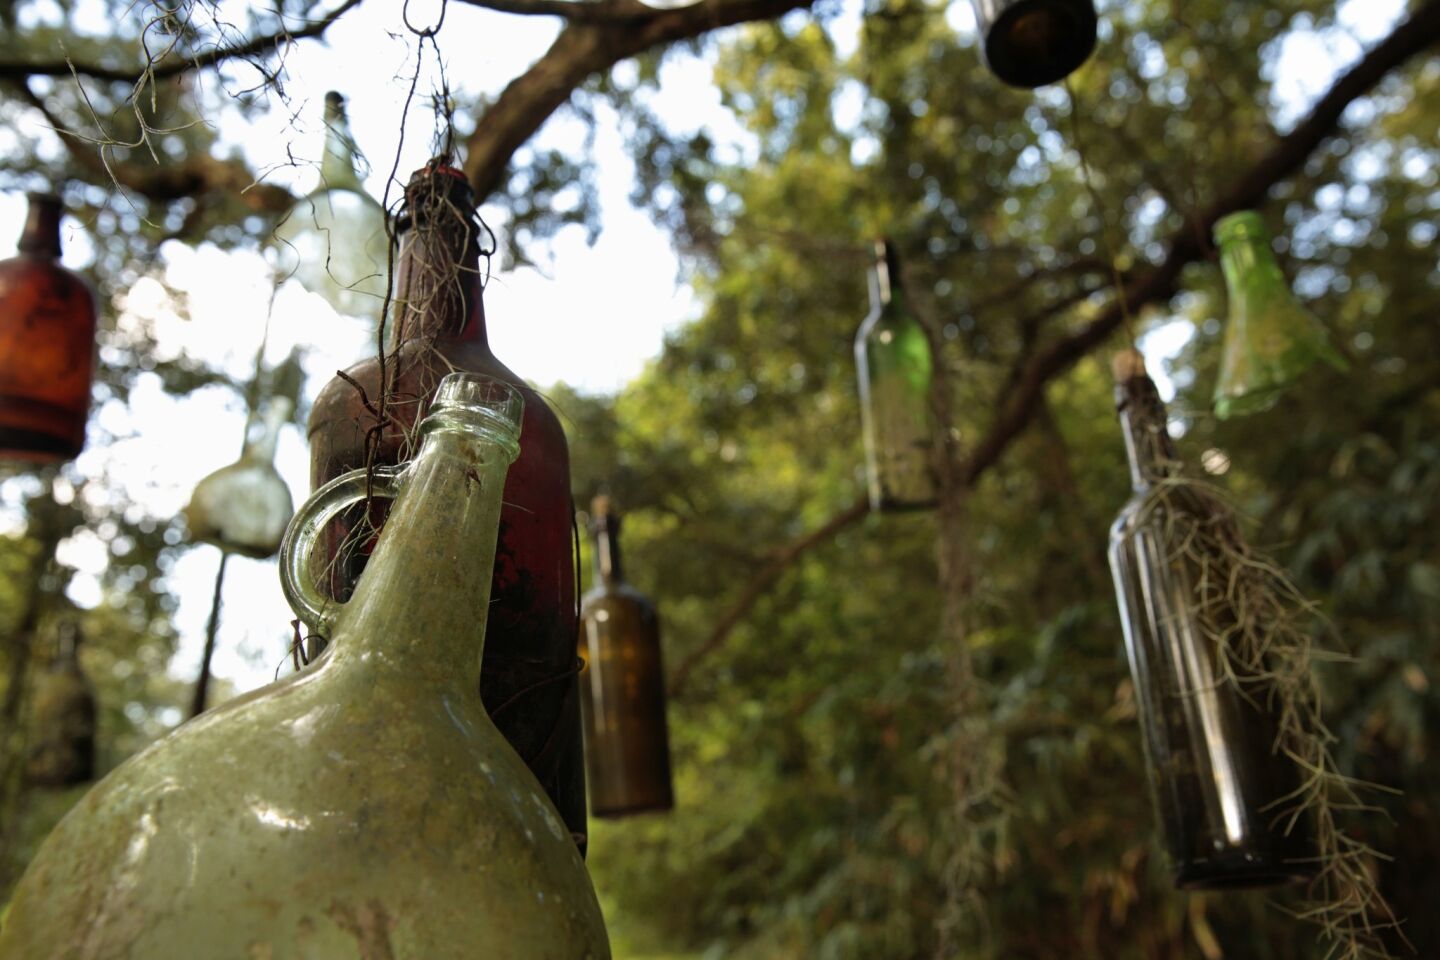 Old bottles hang in a tree, placed there for spiritual reasons.